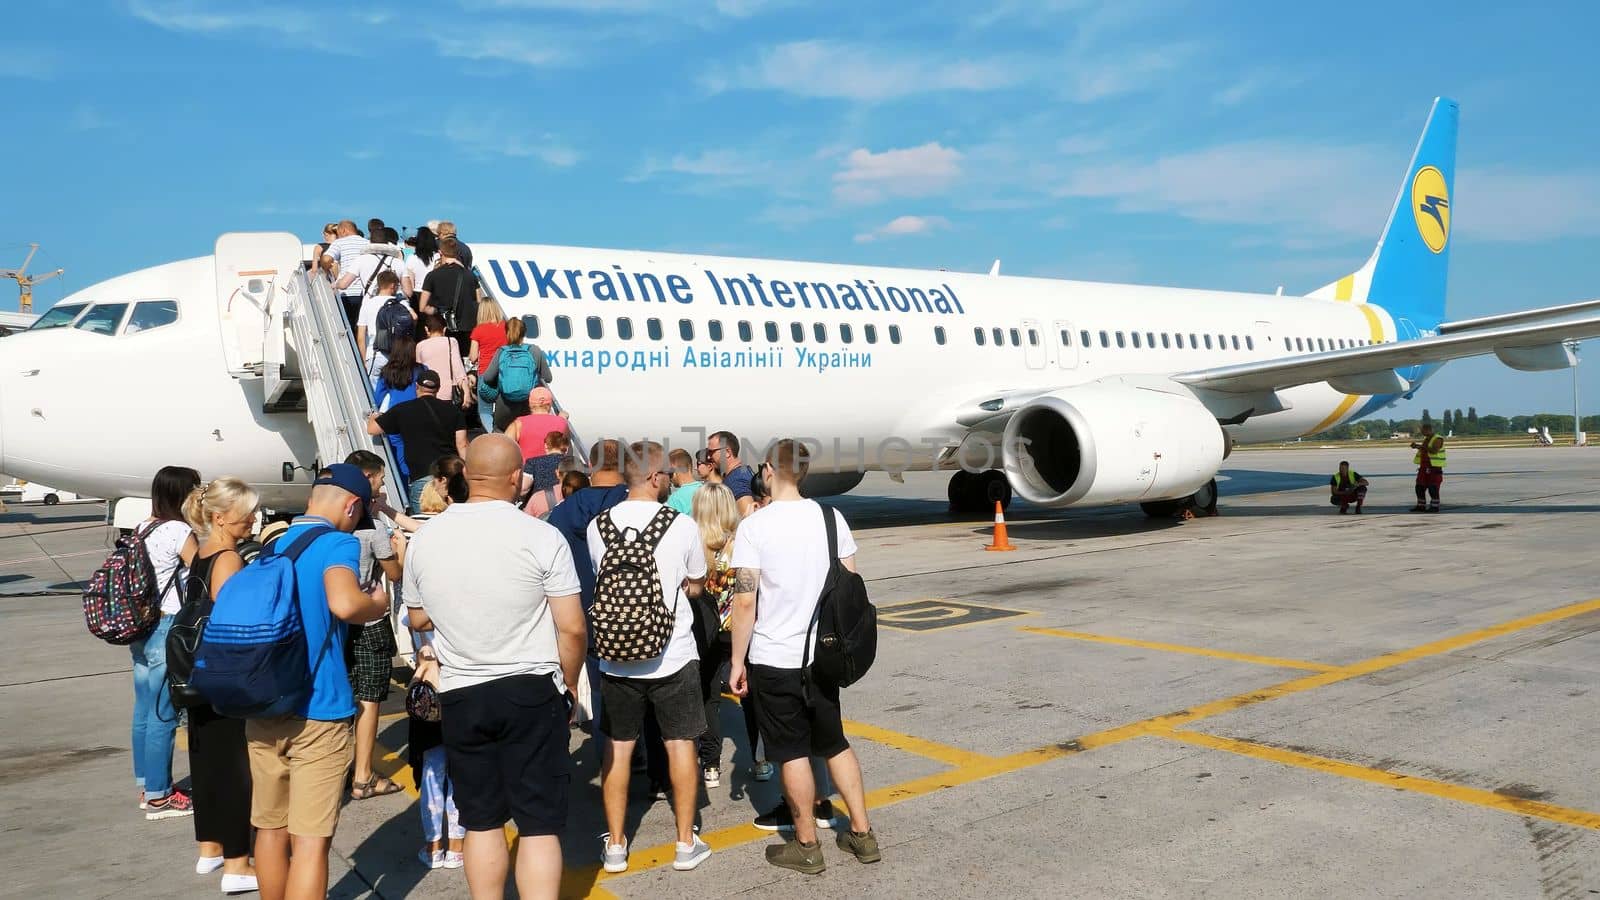 AIRPORT BORYSPIL, UKRAINE - OCTOBER 24, 2018: outdoors, passengers are waiting on plane gangway. They are getting ready to boarding the plane . Ukraine International Airlines. summer sunny day by djtreneryay